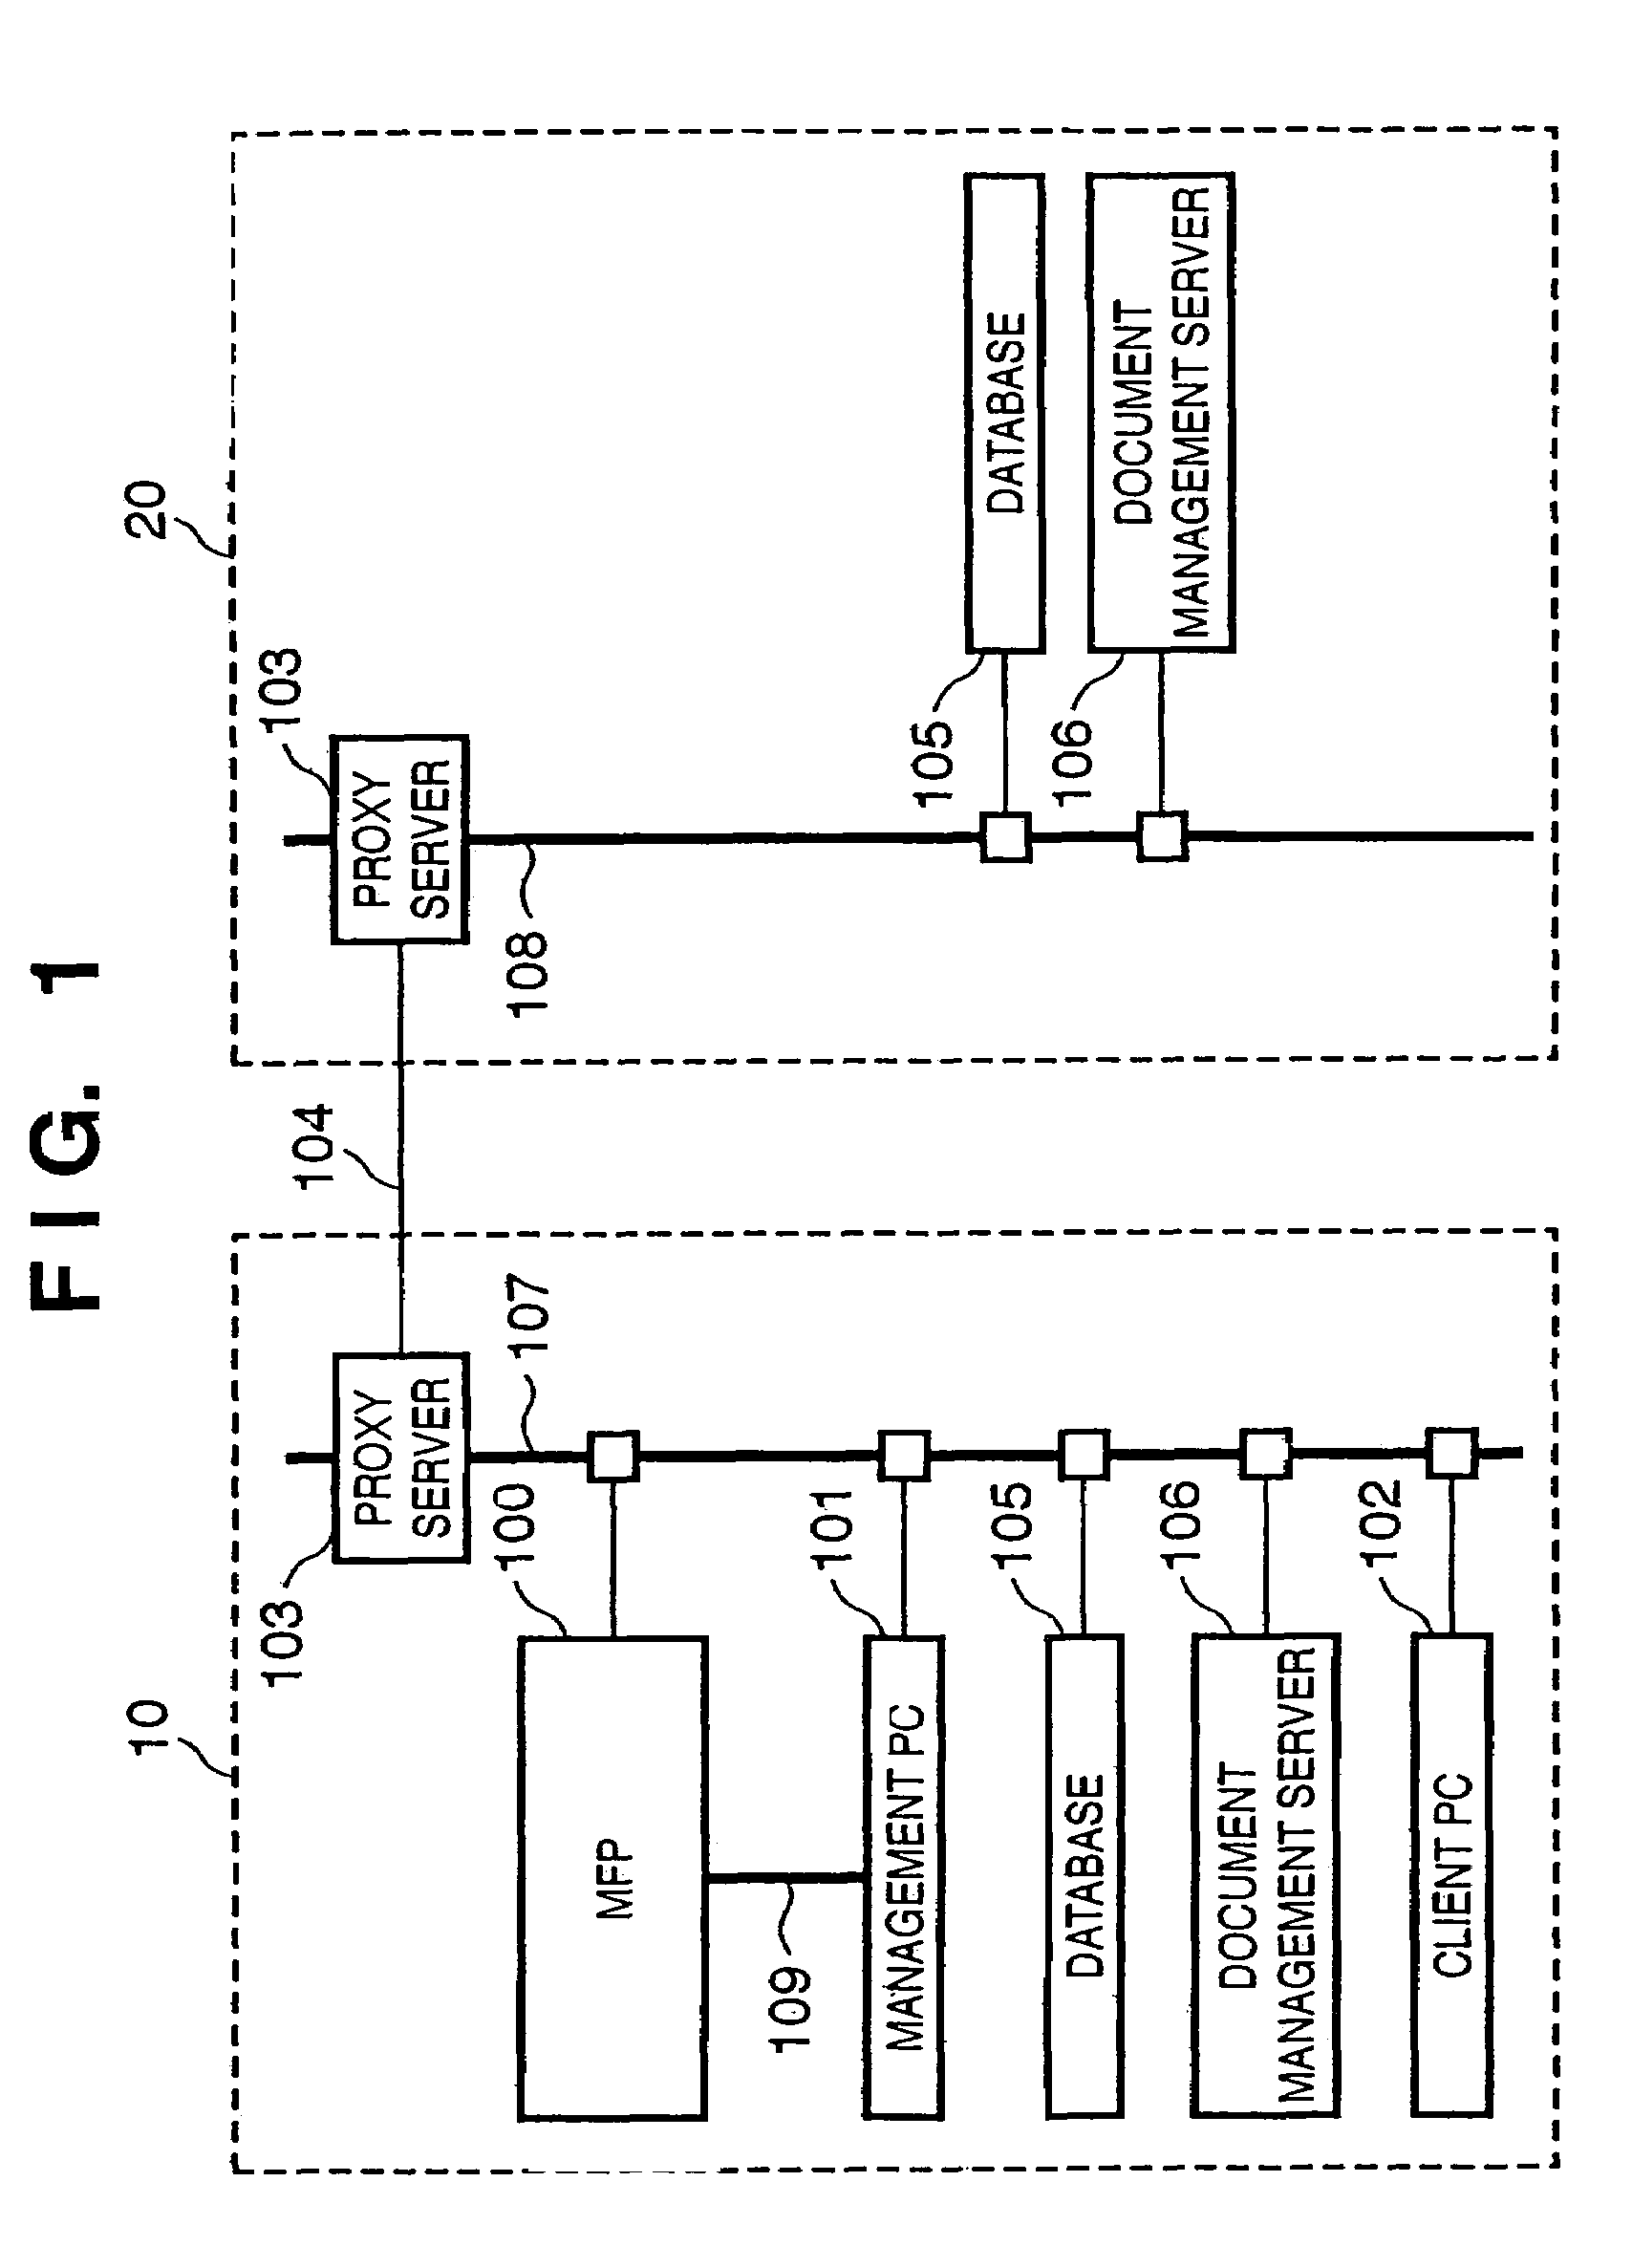 Image processing method and image processing system